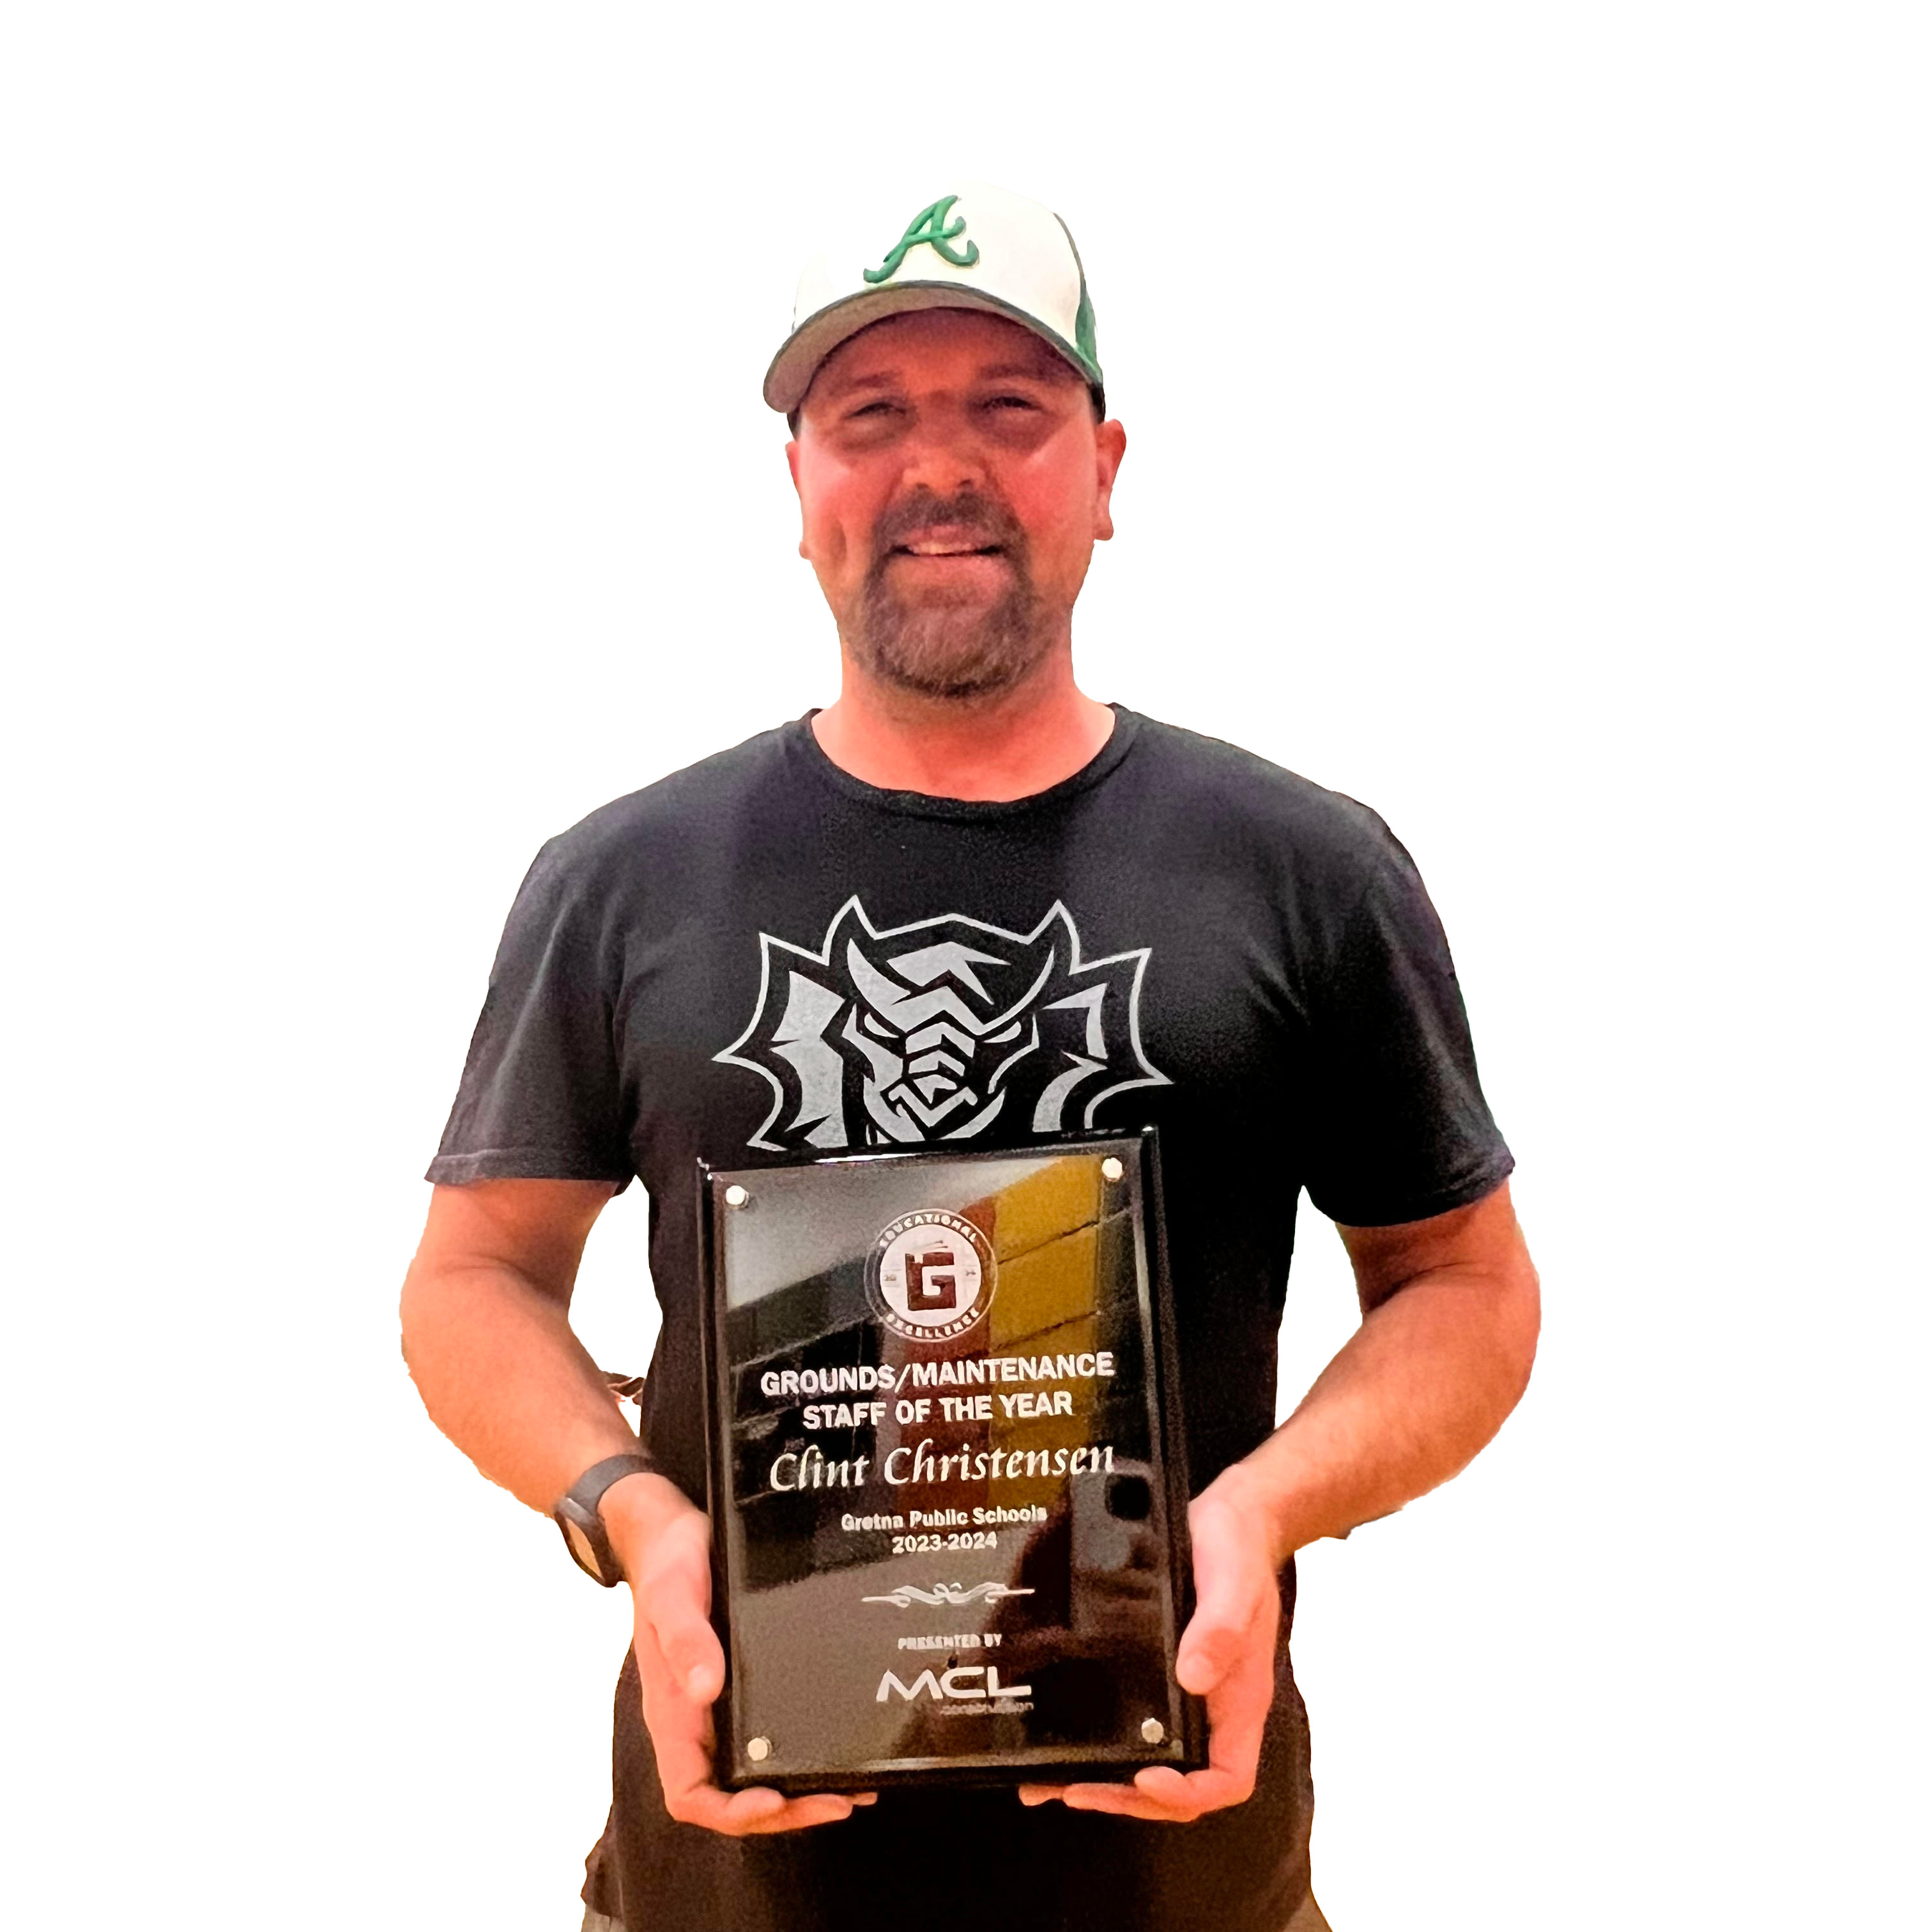 photo of man holding a plaque for Ground/Maintenance staff of the year presented by MCL Construction